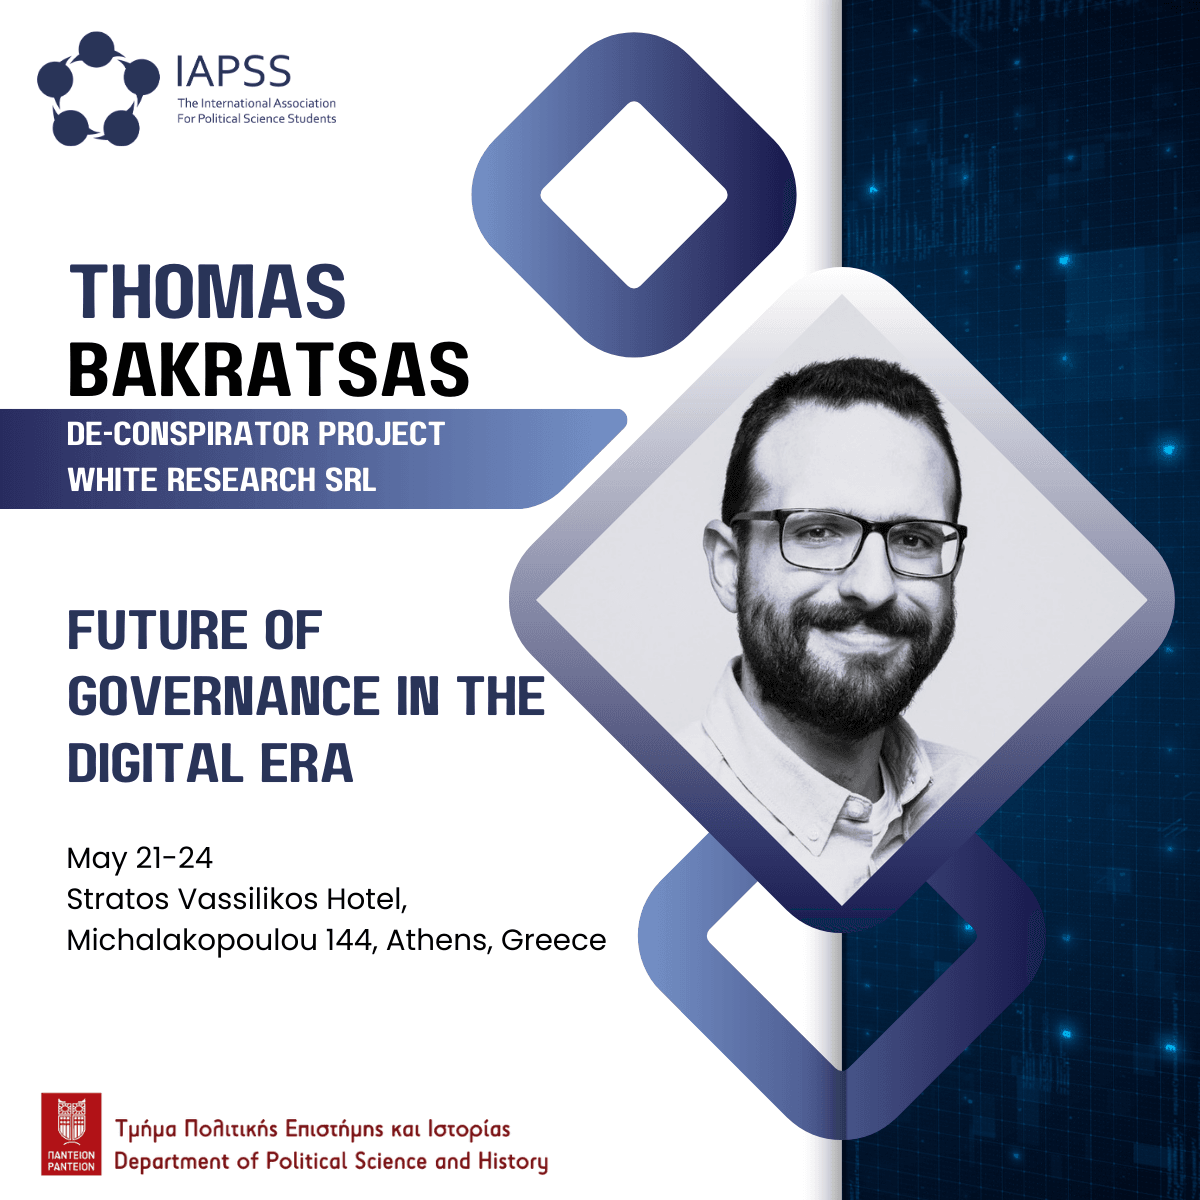 Introducing the 2024 WC Speaker!
Thomas Bakratsas, Senior Project Manager at White Research, is a leader in EU-funded projects and research. With top honors in Political Science and a distinguished M.A. in Philosophy, Politics, and Economics, his insights are not to be missed.